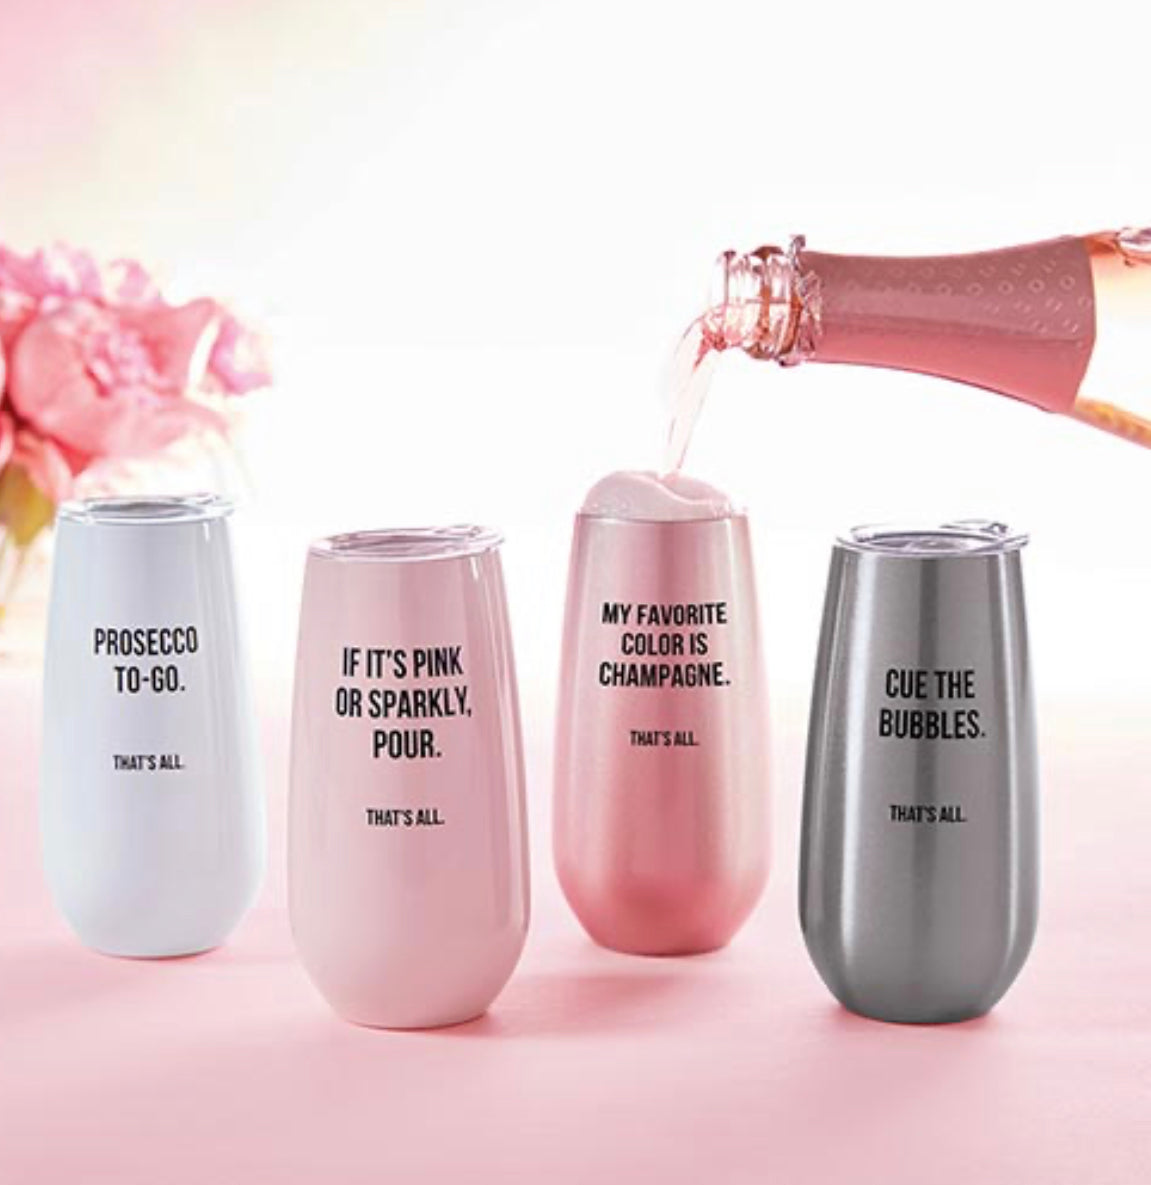 6 oz stainless steel champagne tumbler in a silver color with a plastic lid with words in black saying "Cue the bubbles. That's all." displayed with other tumblers of various colors and someone is pouring champagne into one of the tumblers